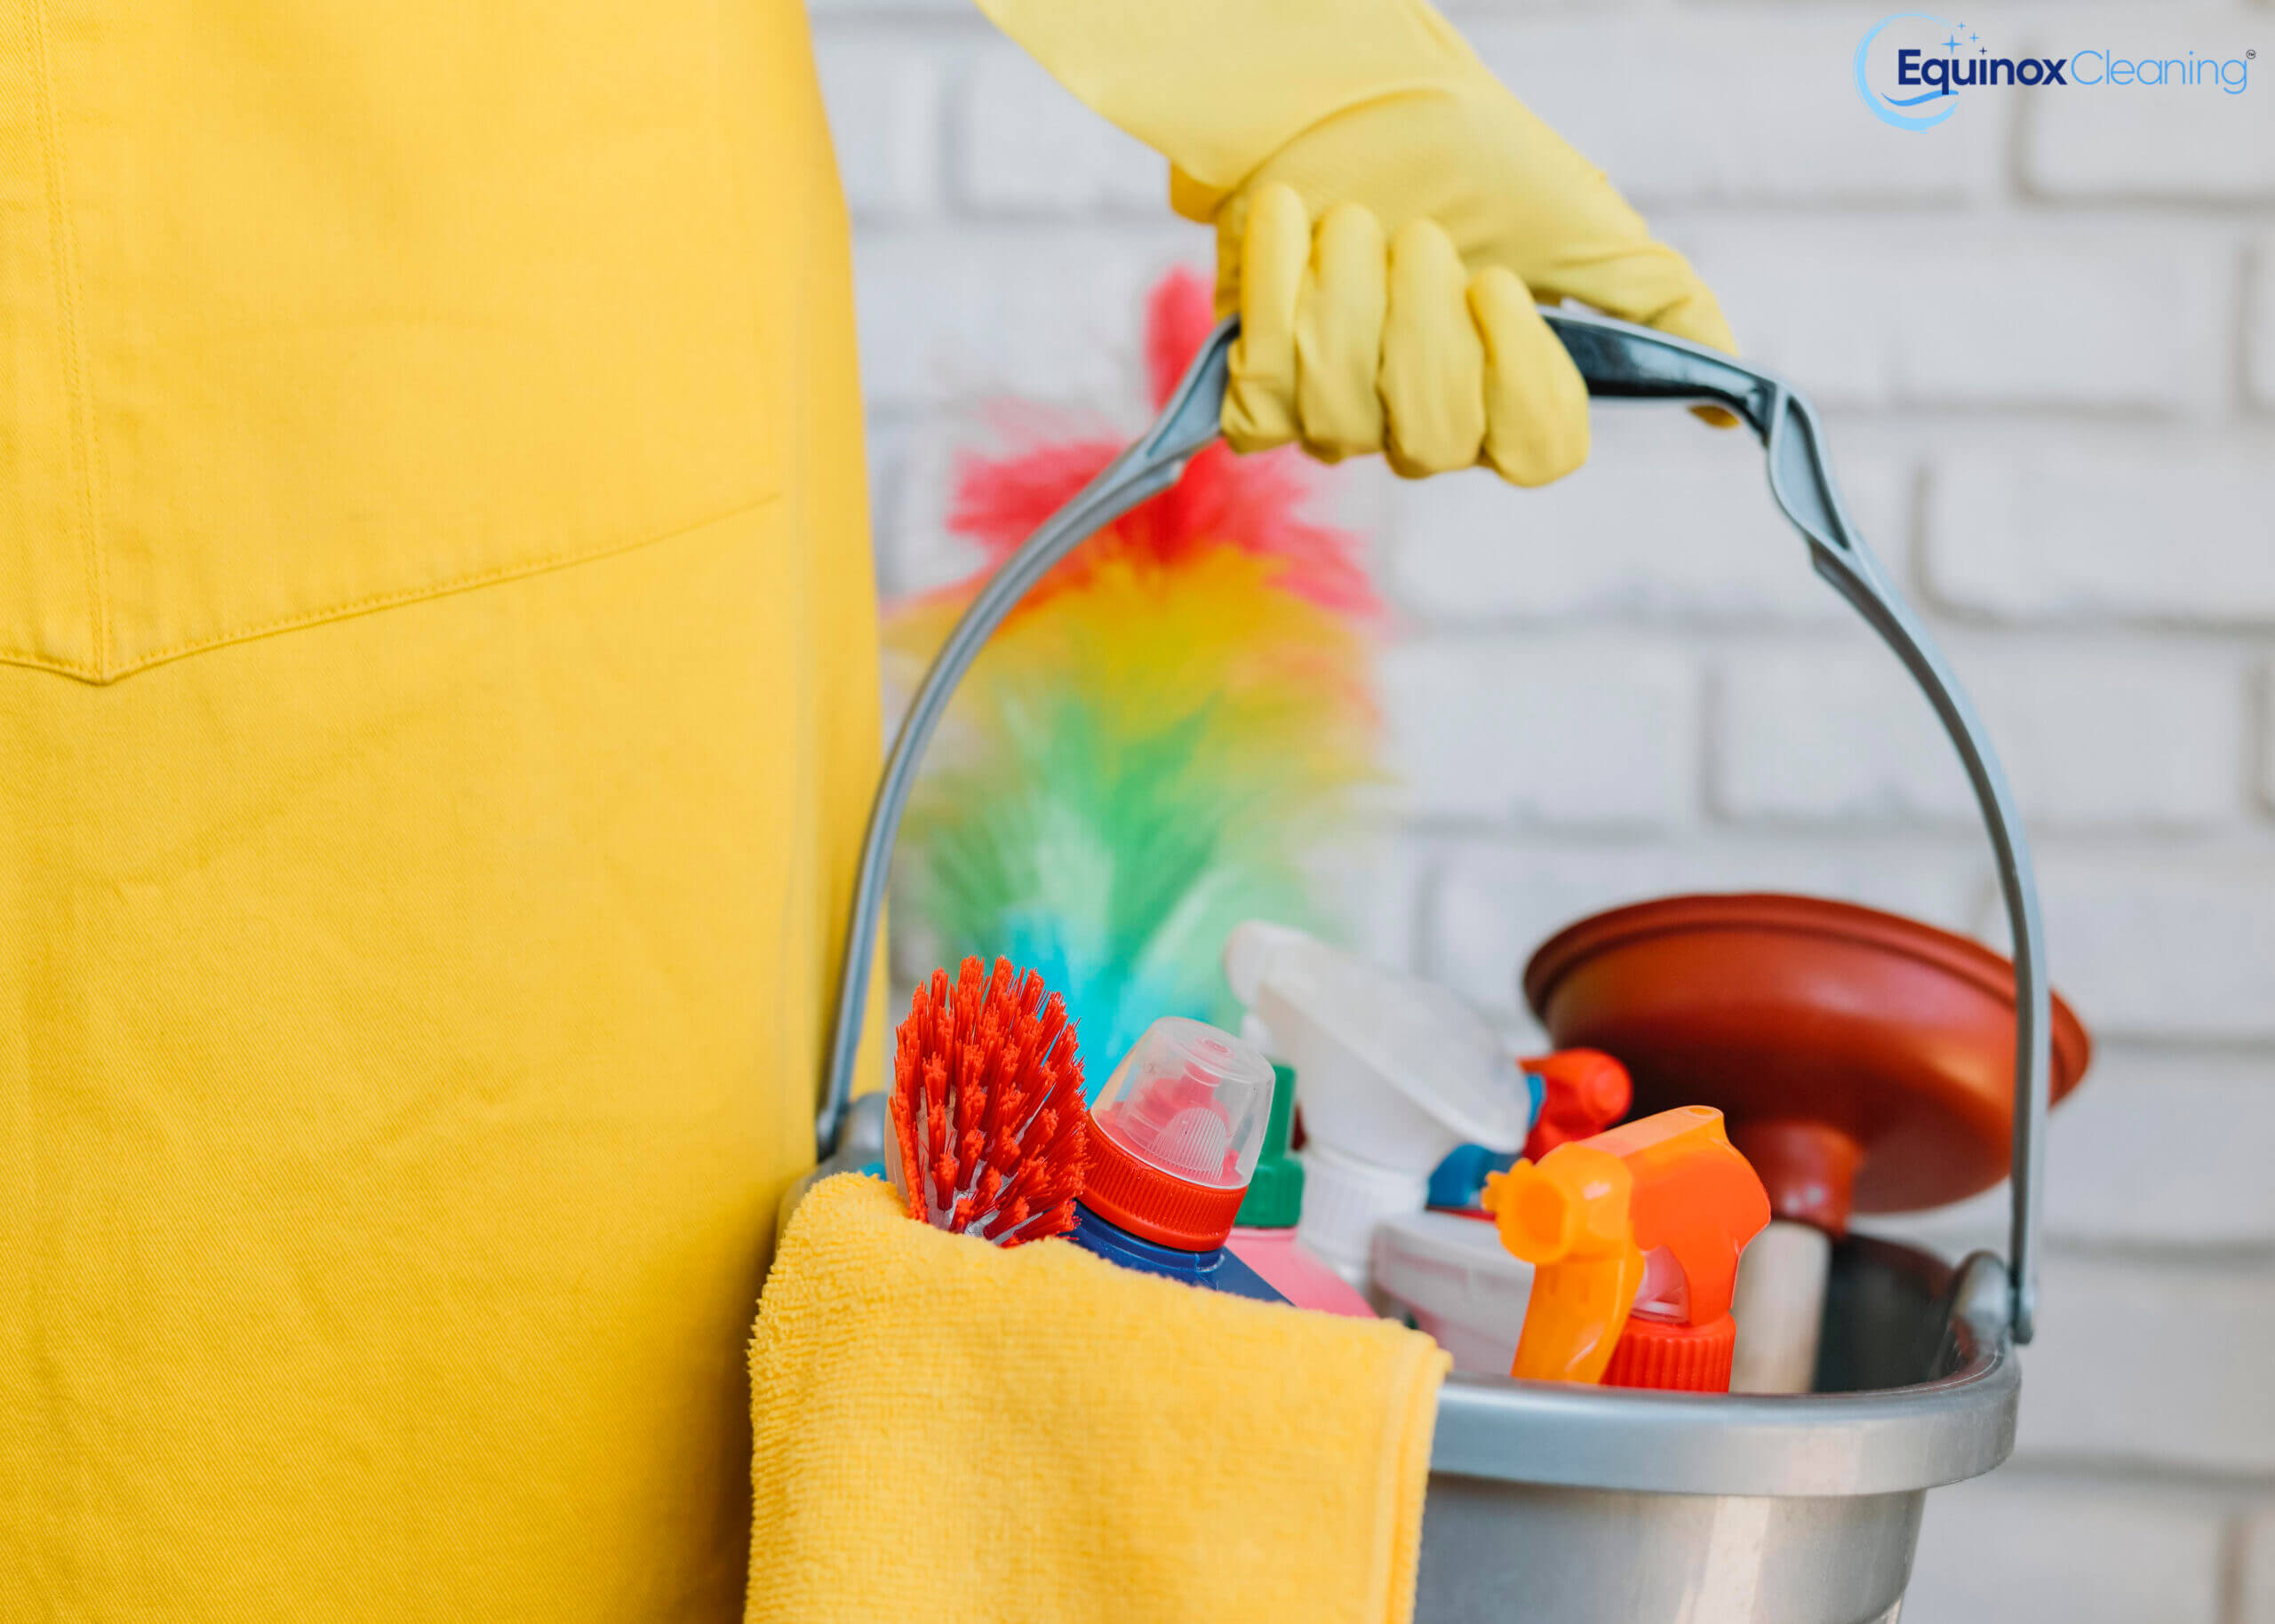 Equinox cleaning Services - Professional Cleaning Service in New Jersey